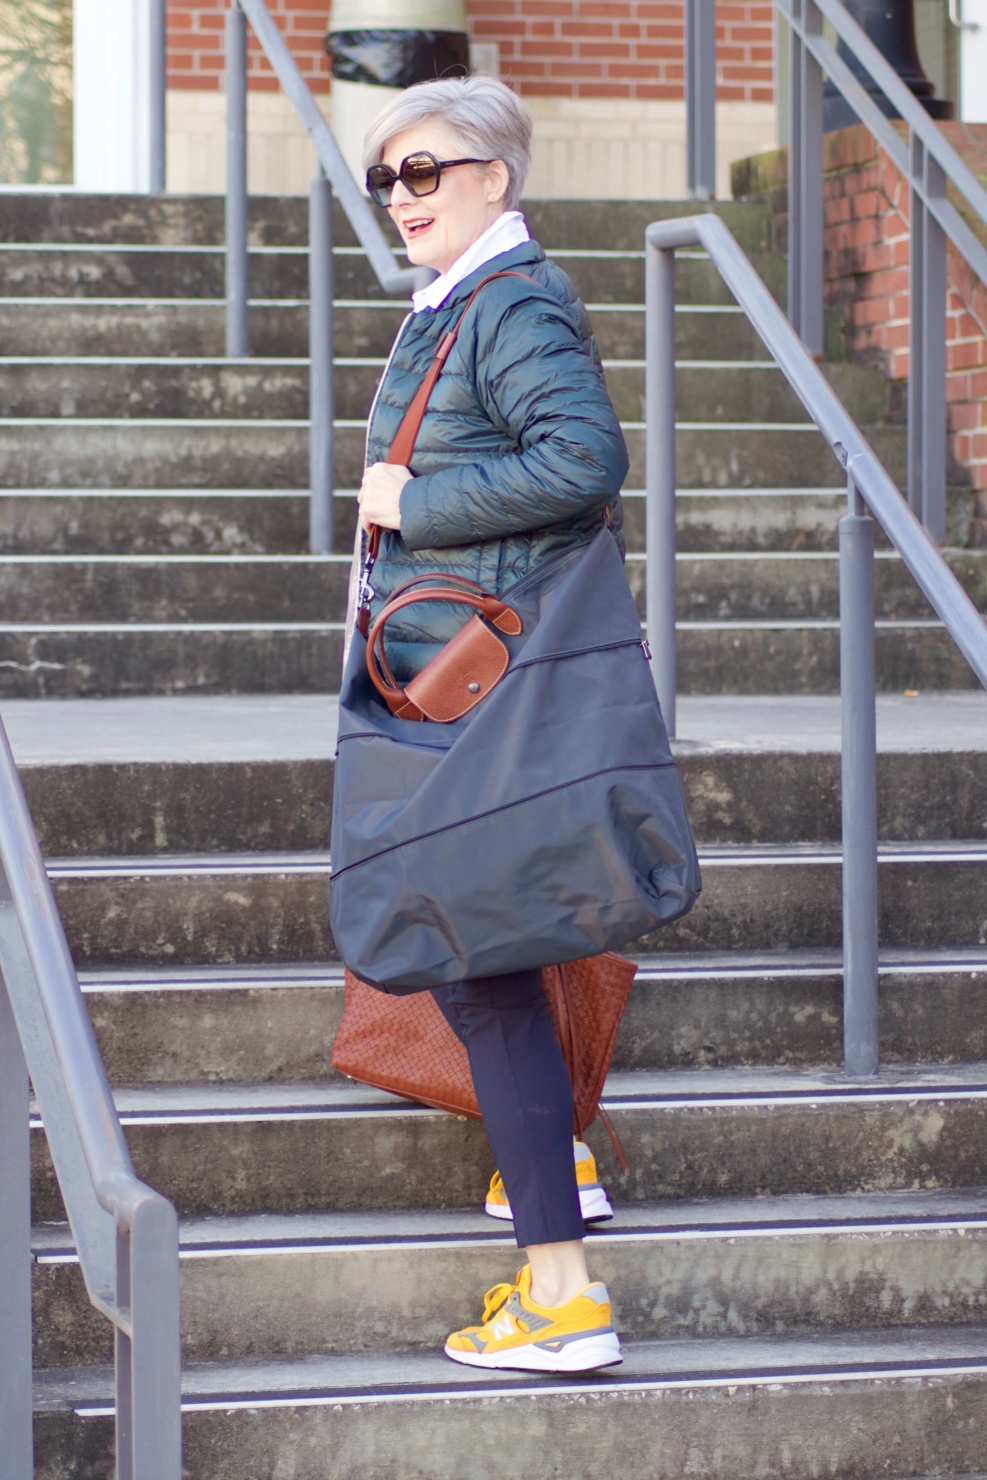 beth from Style at a Certain Age wears Athleta pants, white shirt, puffer jacket, and sneakers